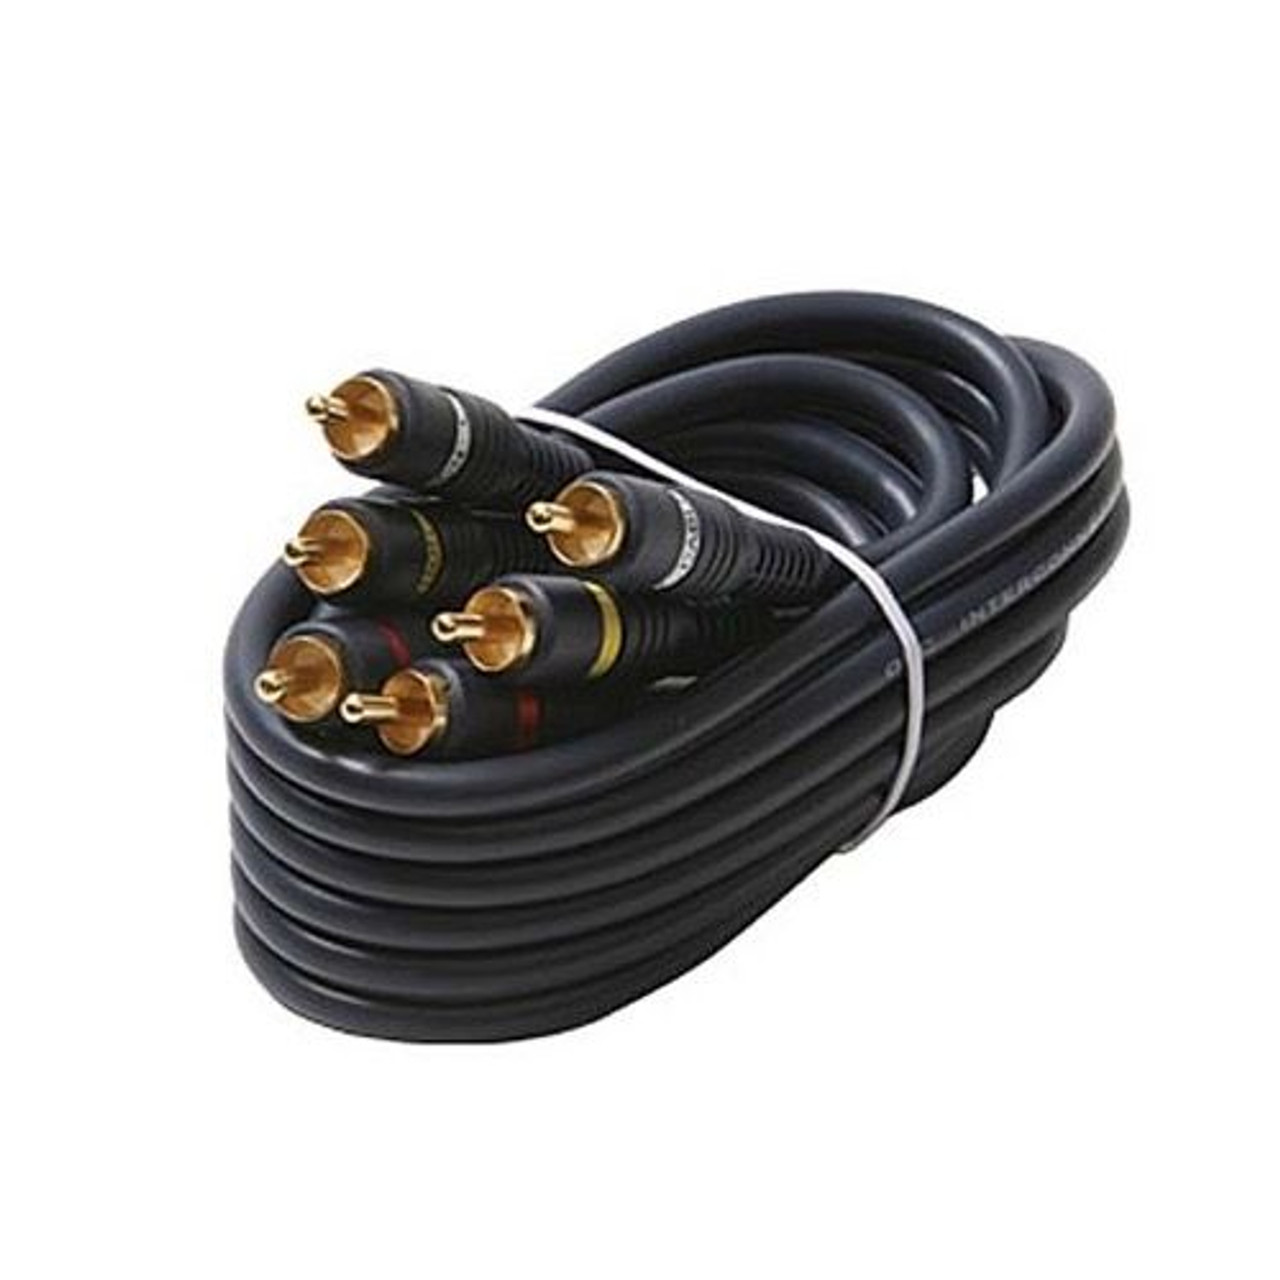 Eagle 75' FT Python 3 RCA Male to 3 RCA Male Composite Cable Gold Plate Connectors Blue Audio Video Shielded Home Theater Stereo RCA Composite Cable